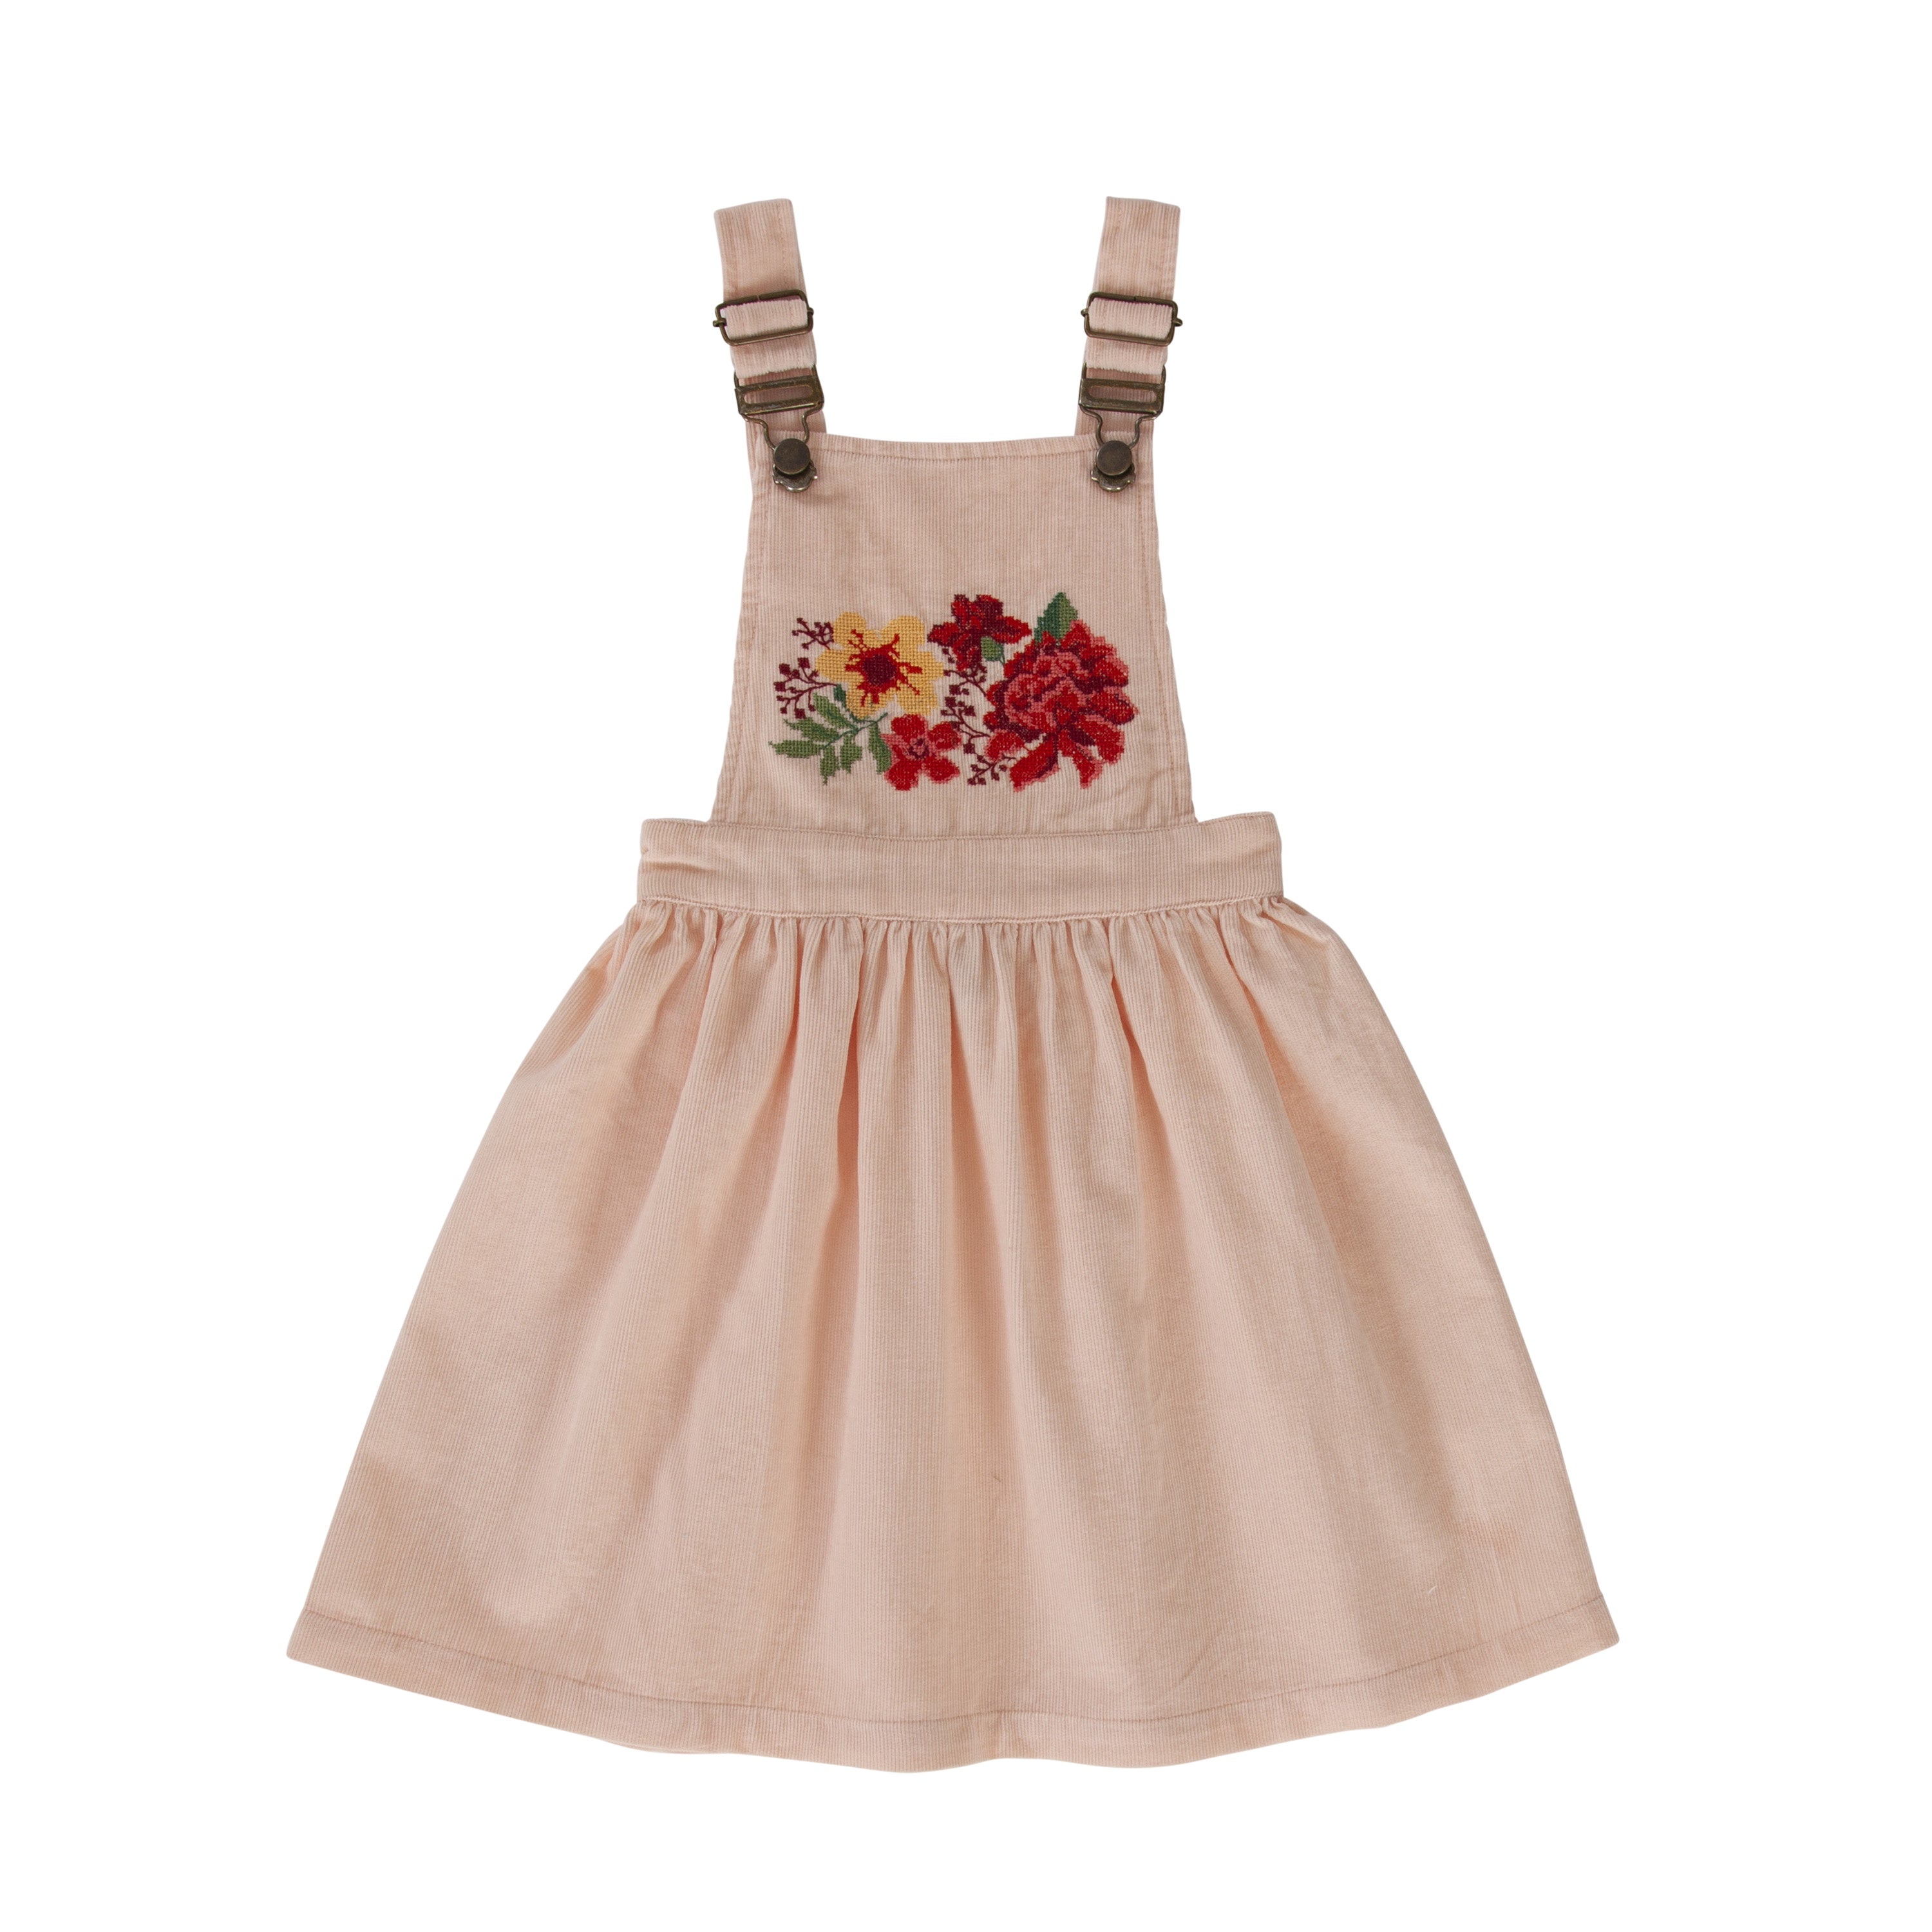 Peggy - Zen Pinafore - Pale Pink